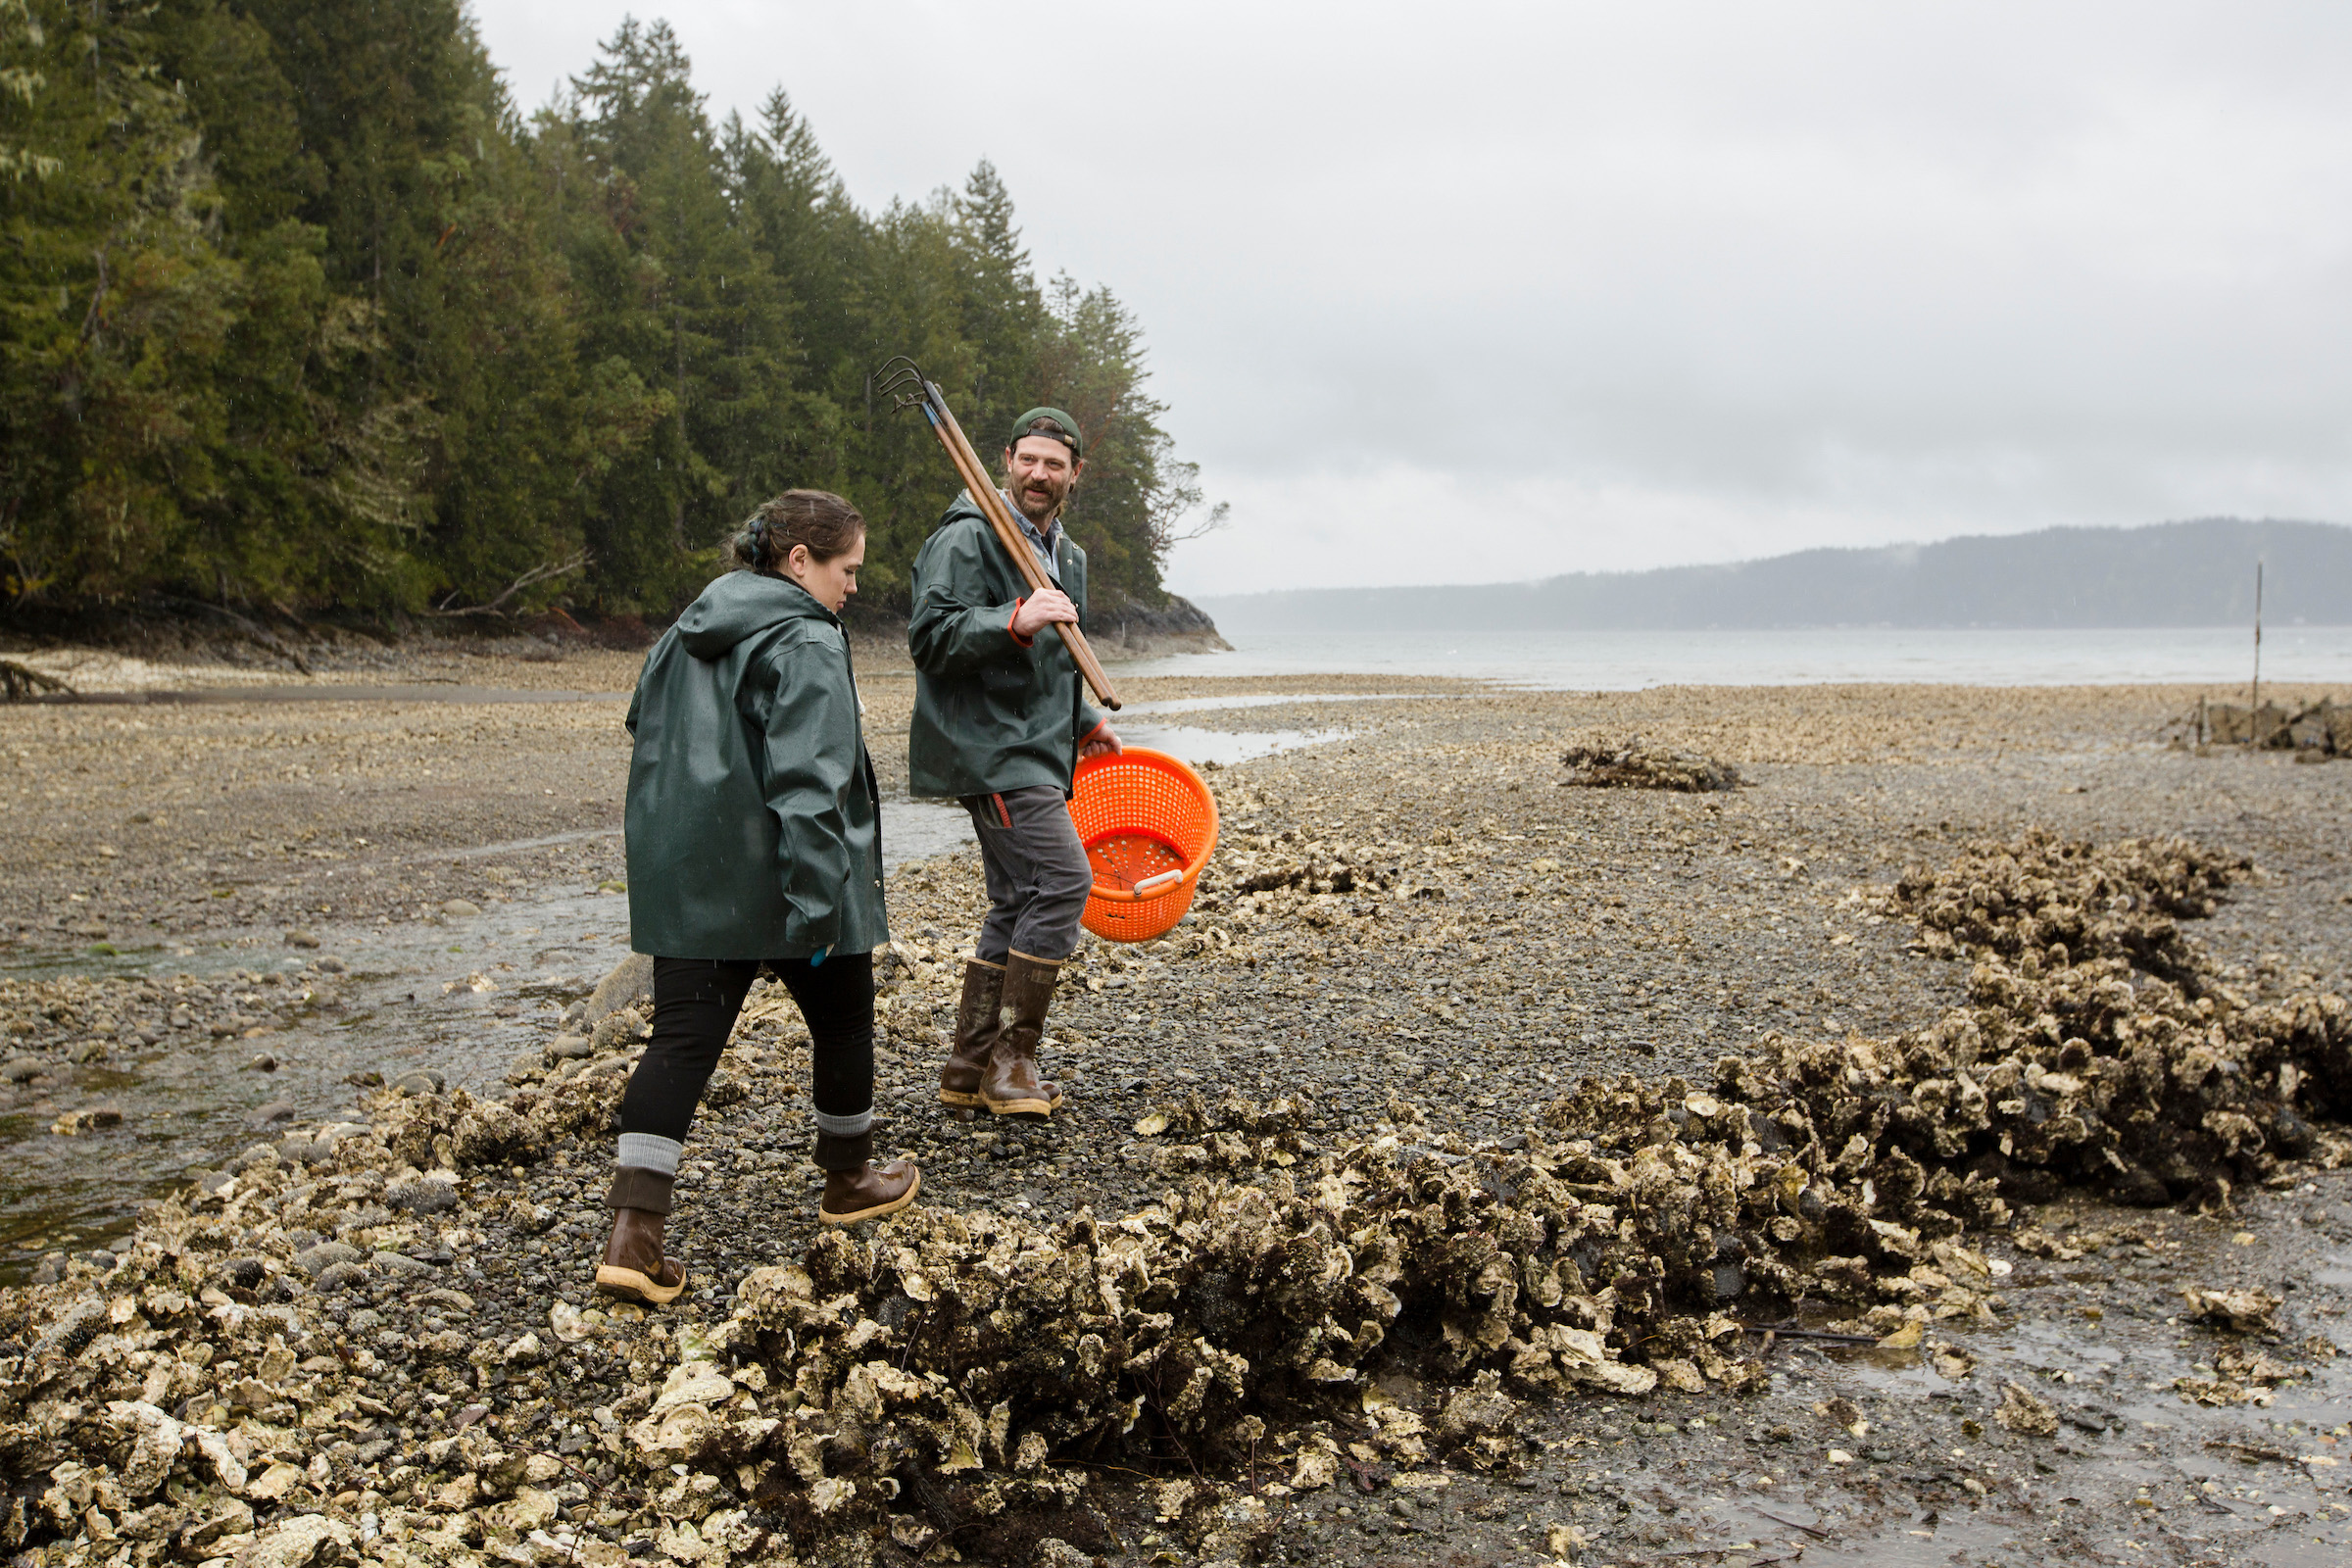 Chef Sara Harvey and her partner, Christian, walking along a large oyster bed in the Hood Canal cove in front of their house in western Washington